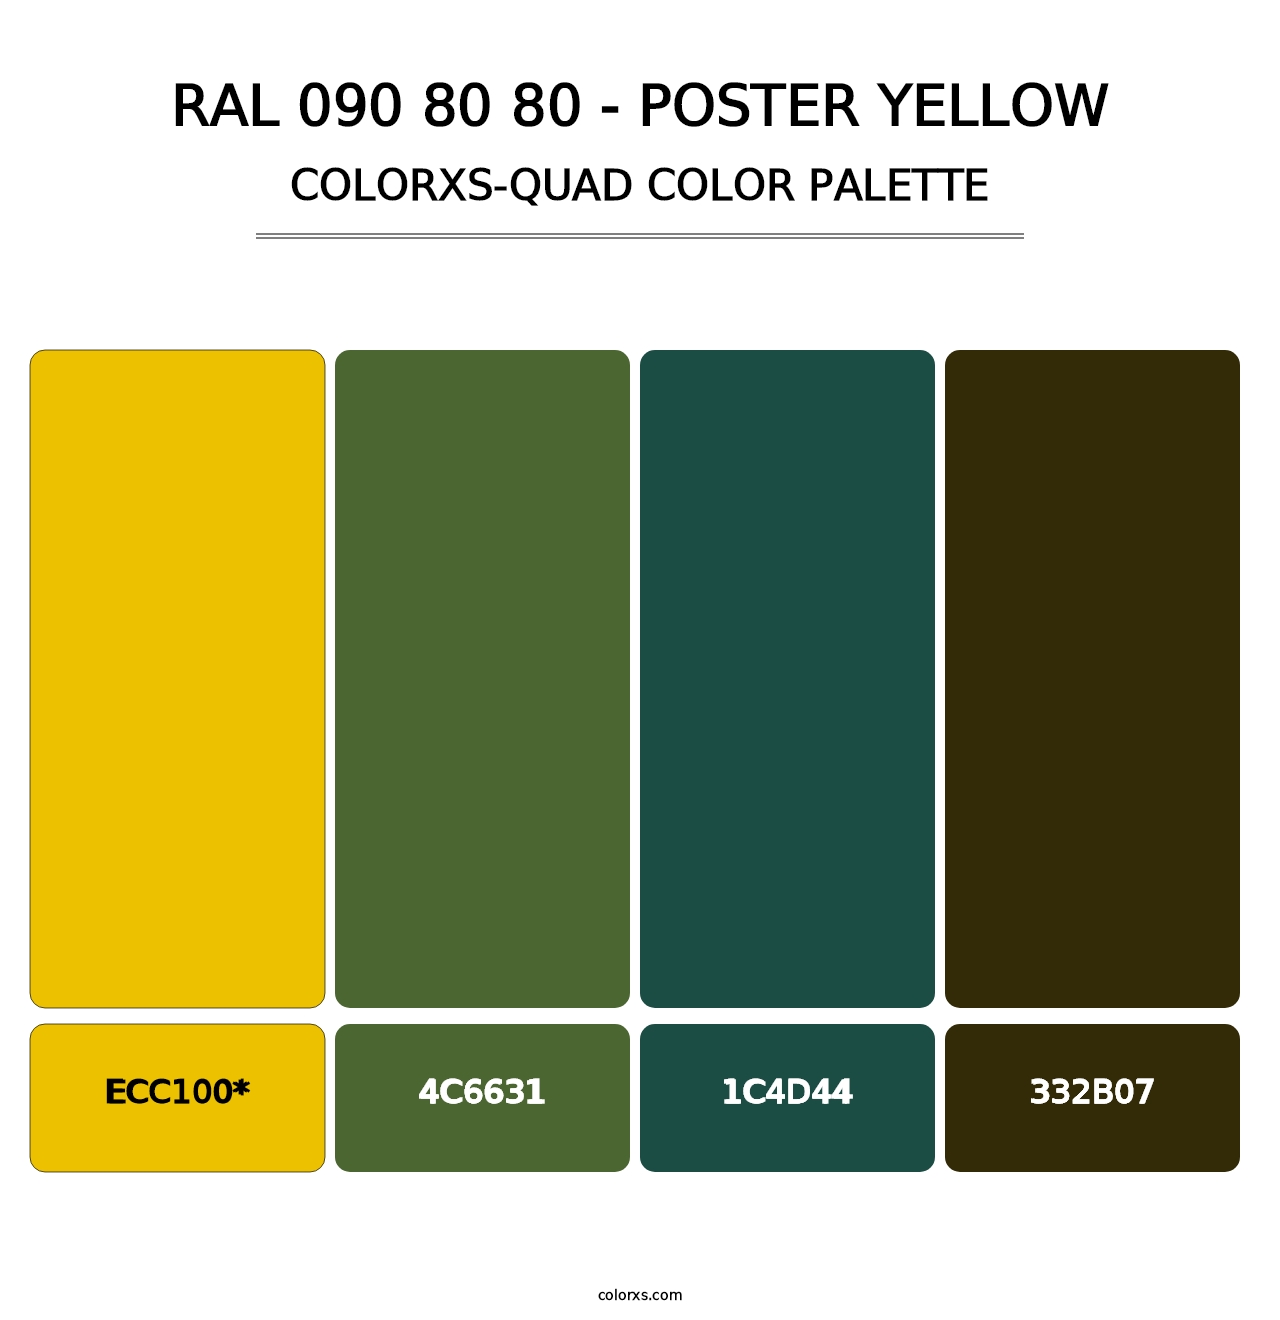 RAL 090 80 80 - Poster Yellow - Colorxs Quad Palette